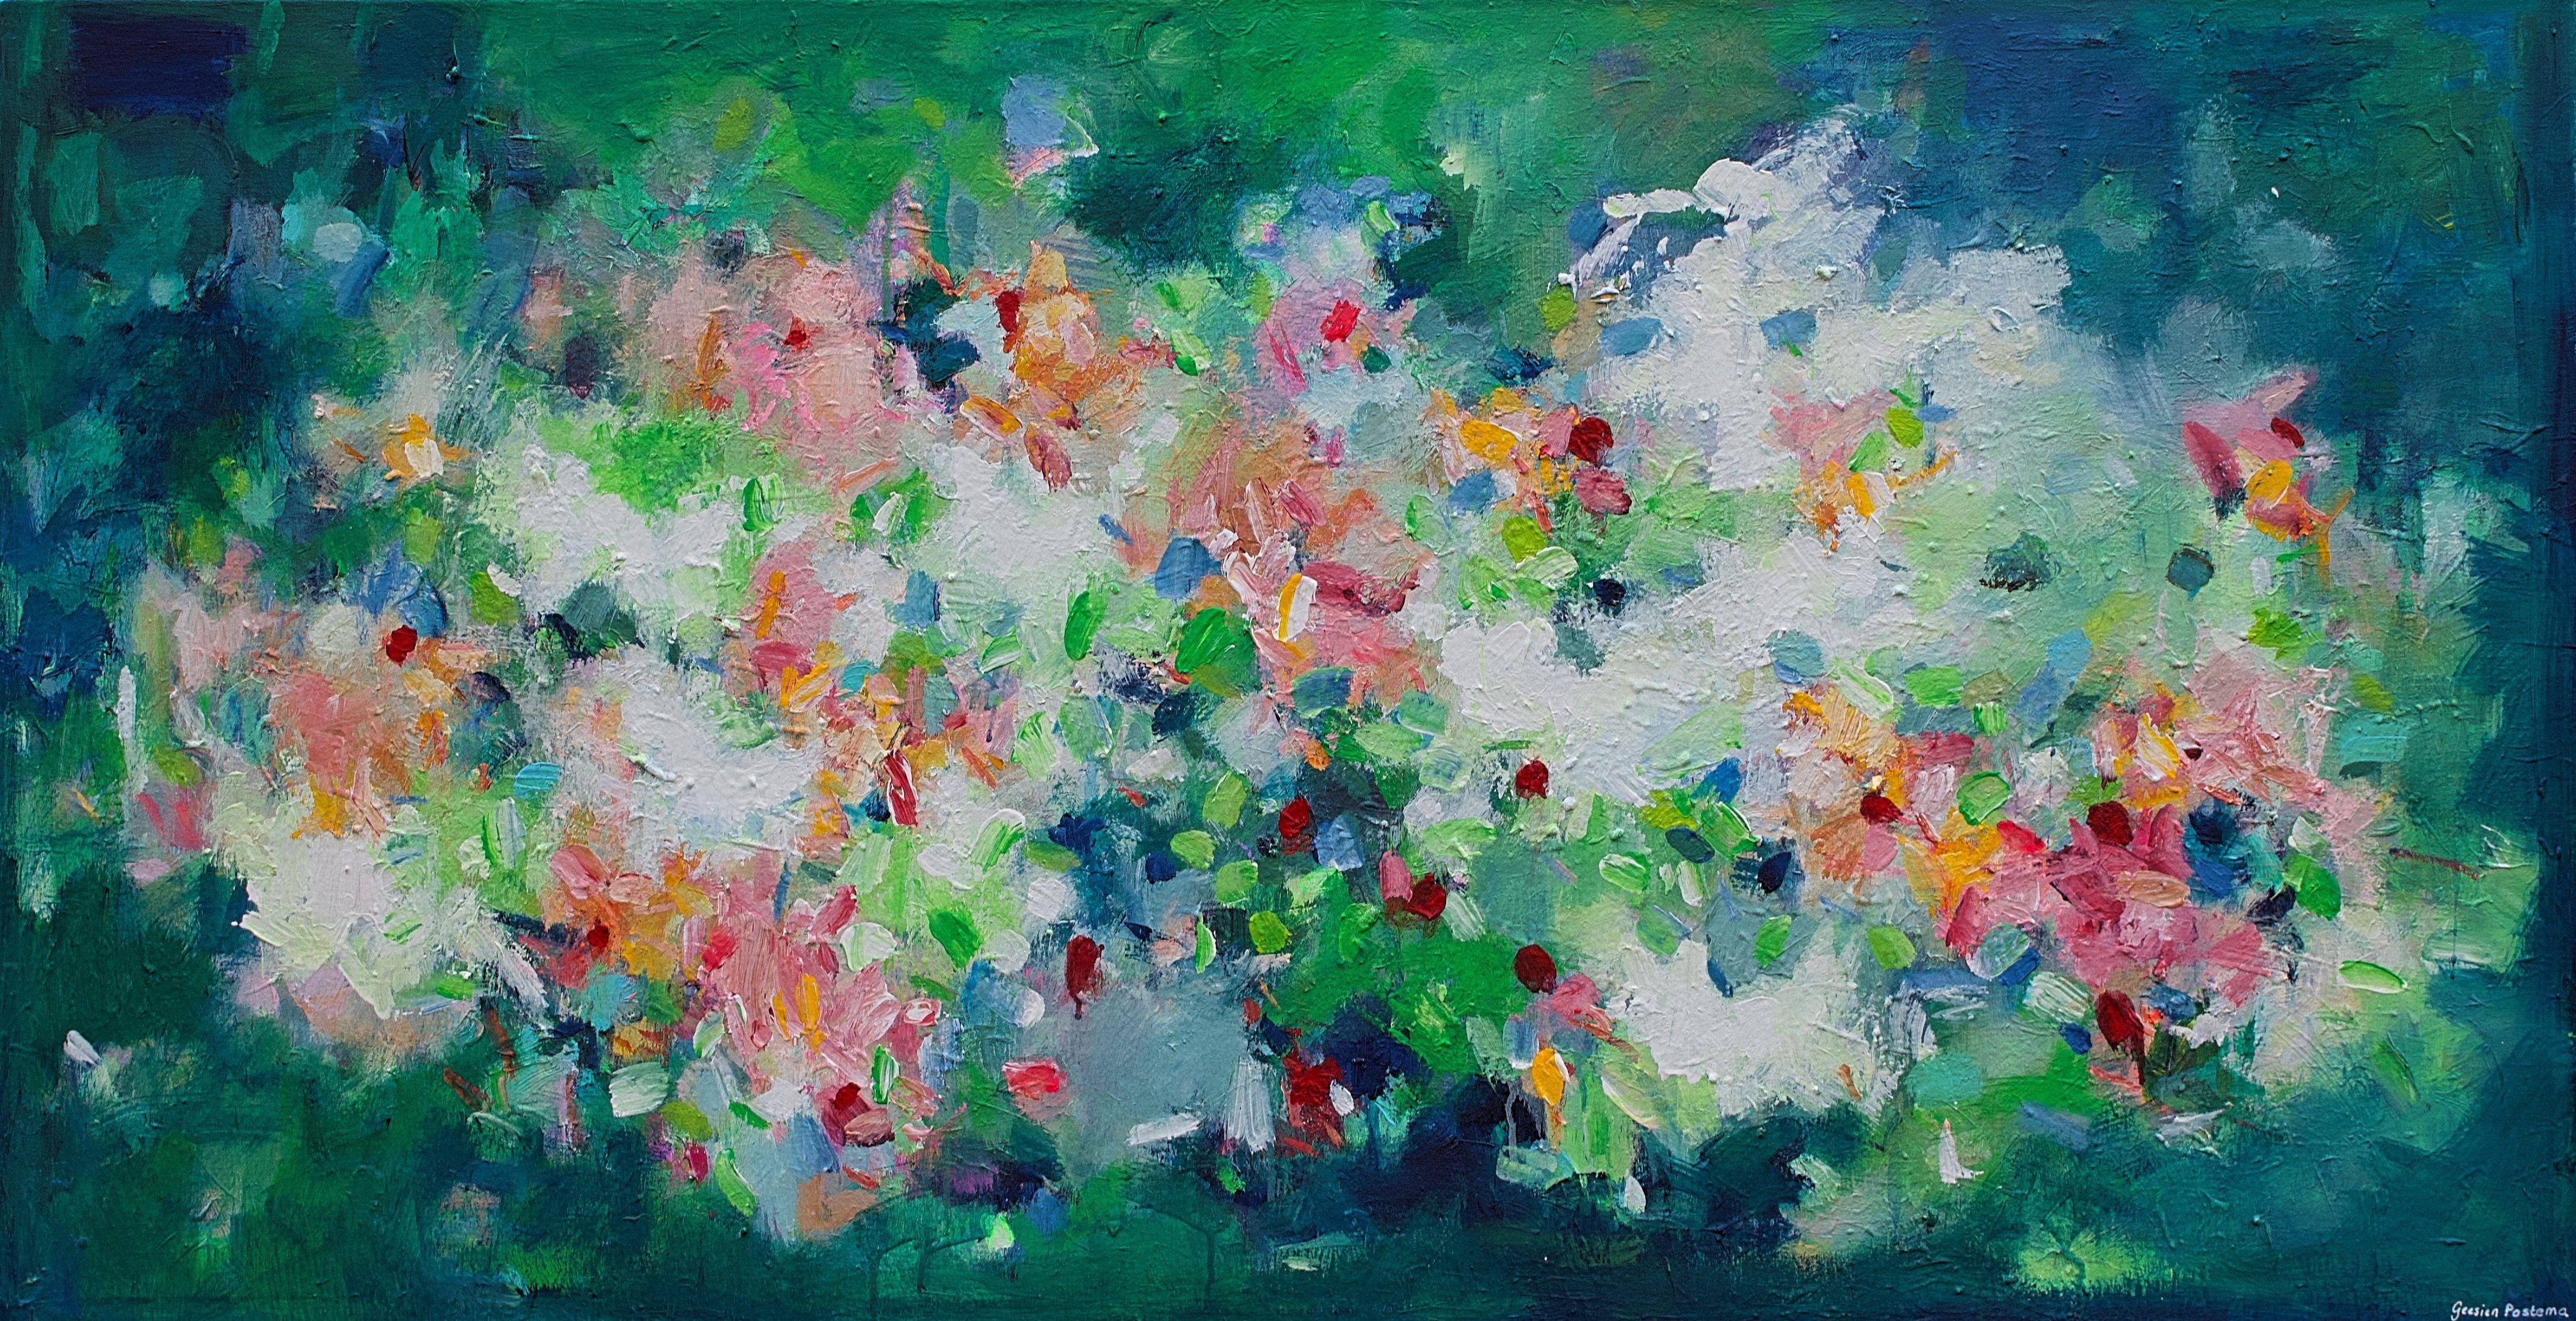 This is a very lovely abstract artwork in green colors in combinations with whites and accents in bright warm colors. It is a horizontal painting, a fantasy inspired by florals and nature in general evoking positive and calming feelings. With the